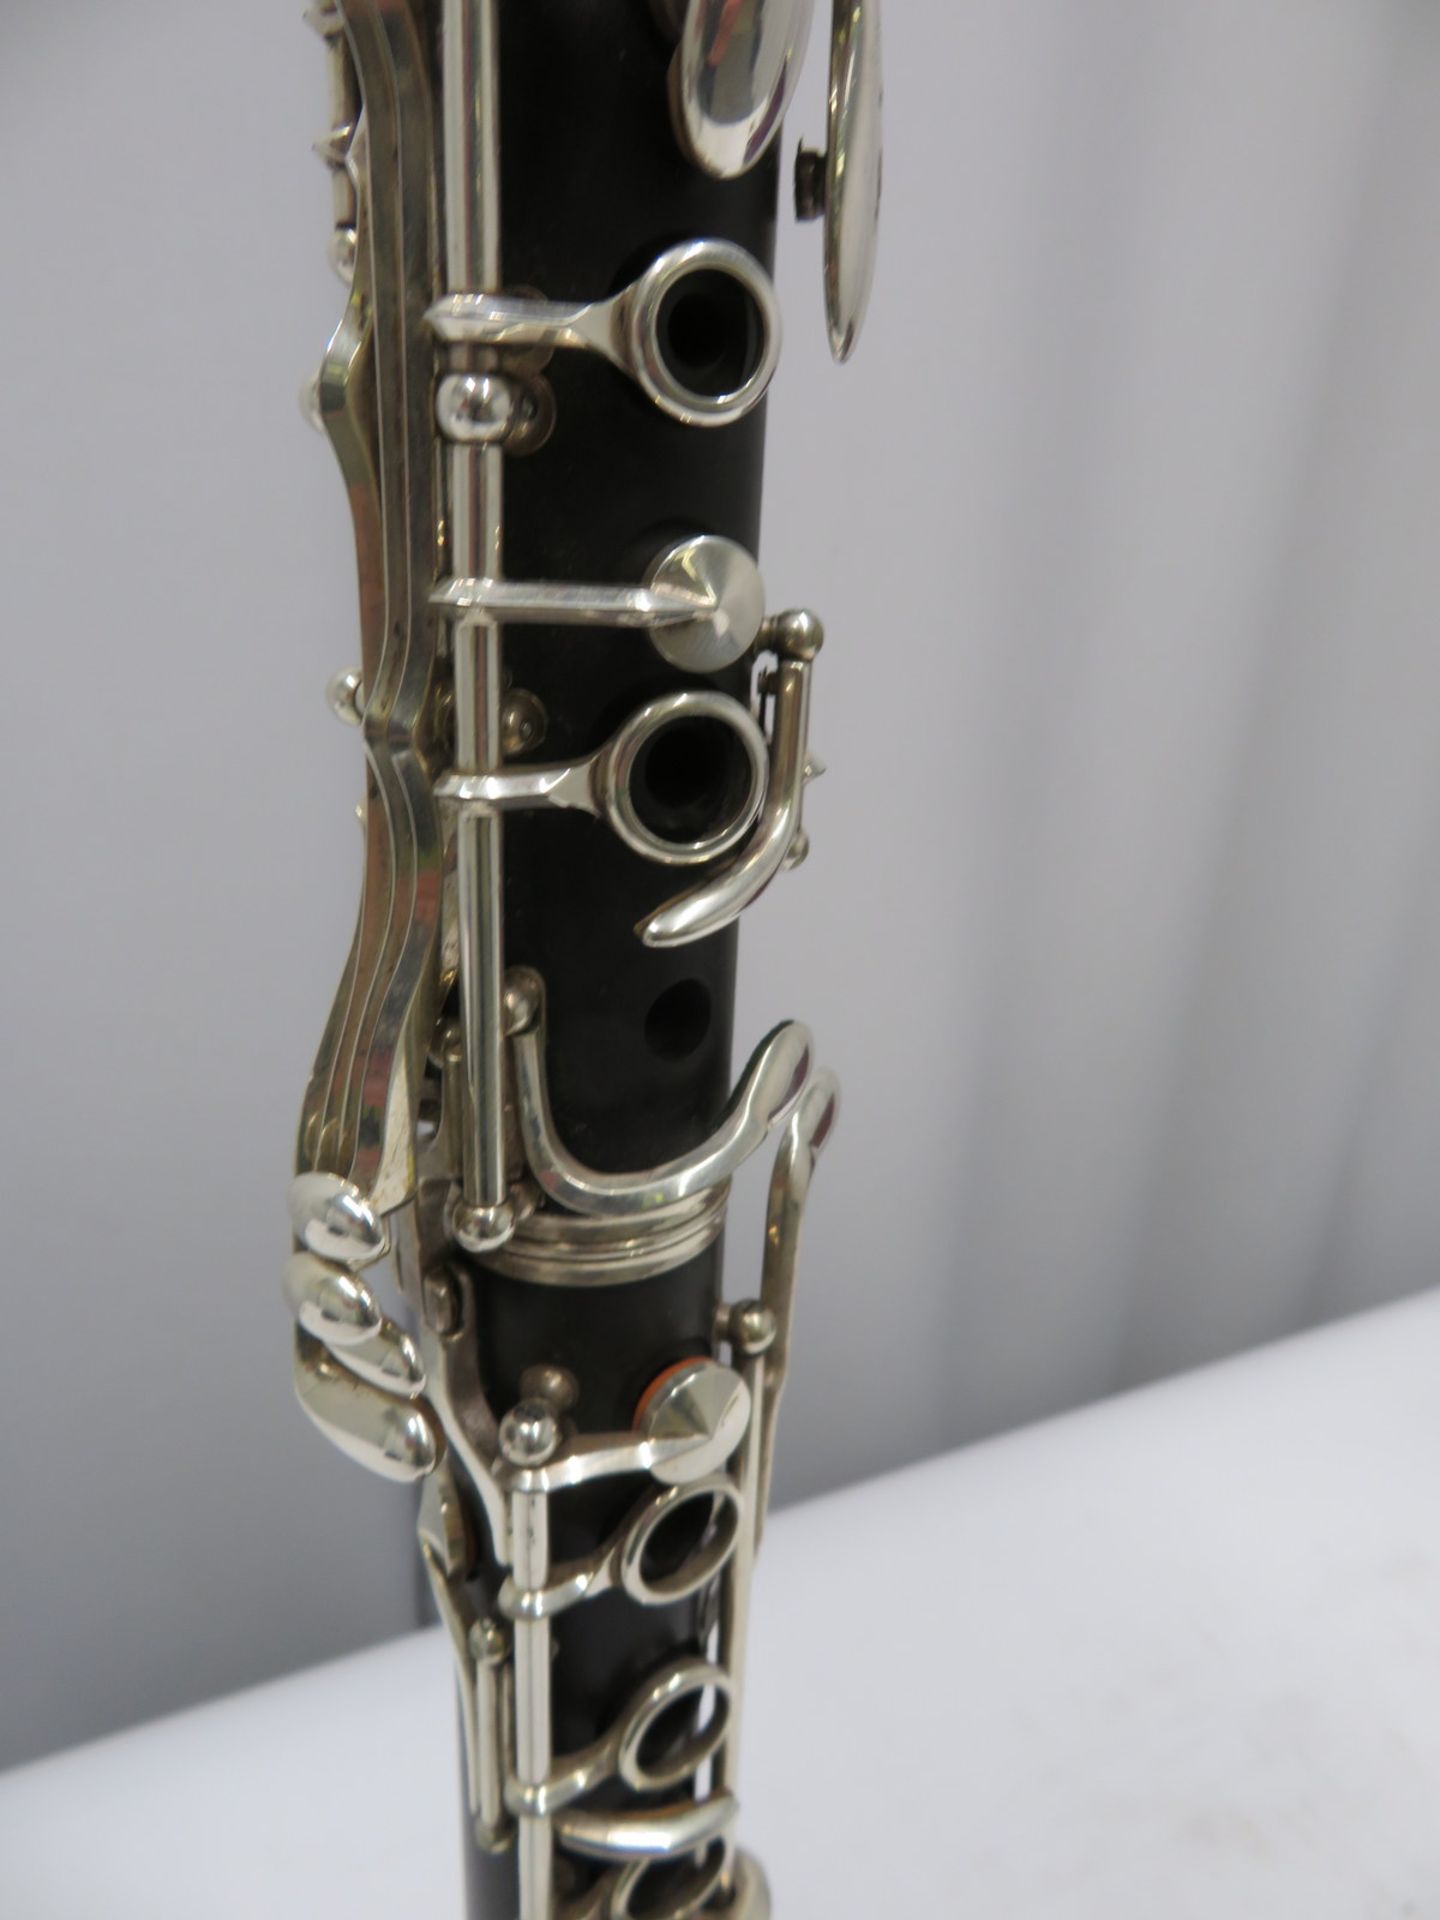 Buffet Crampon L Green clarinet with case. Serial number: 477678. - Image 6 of 19